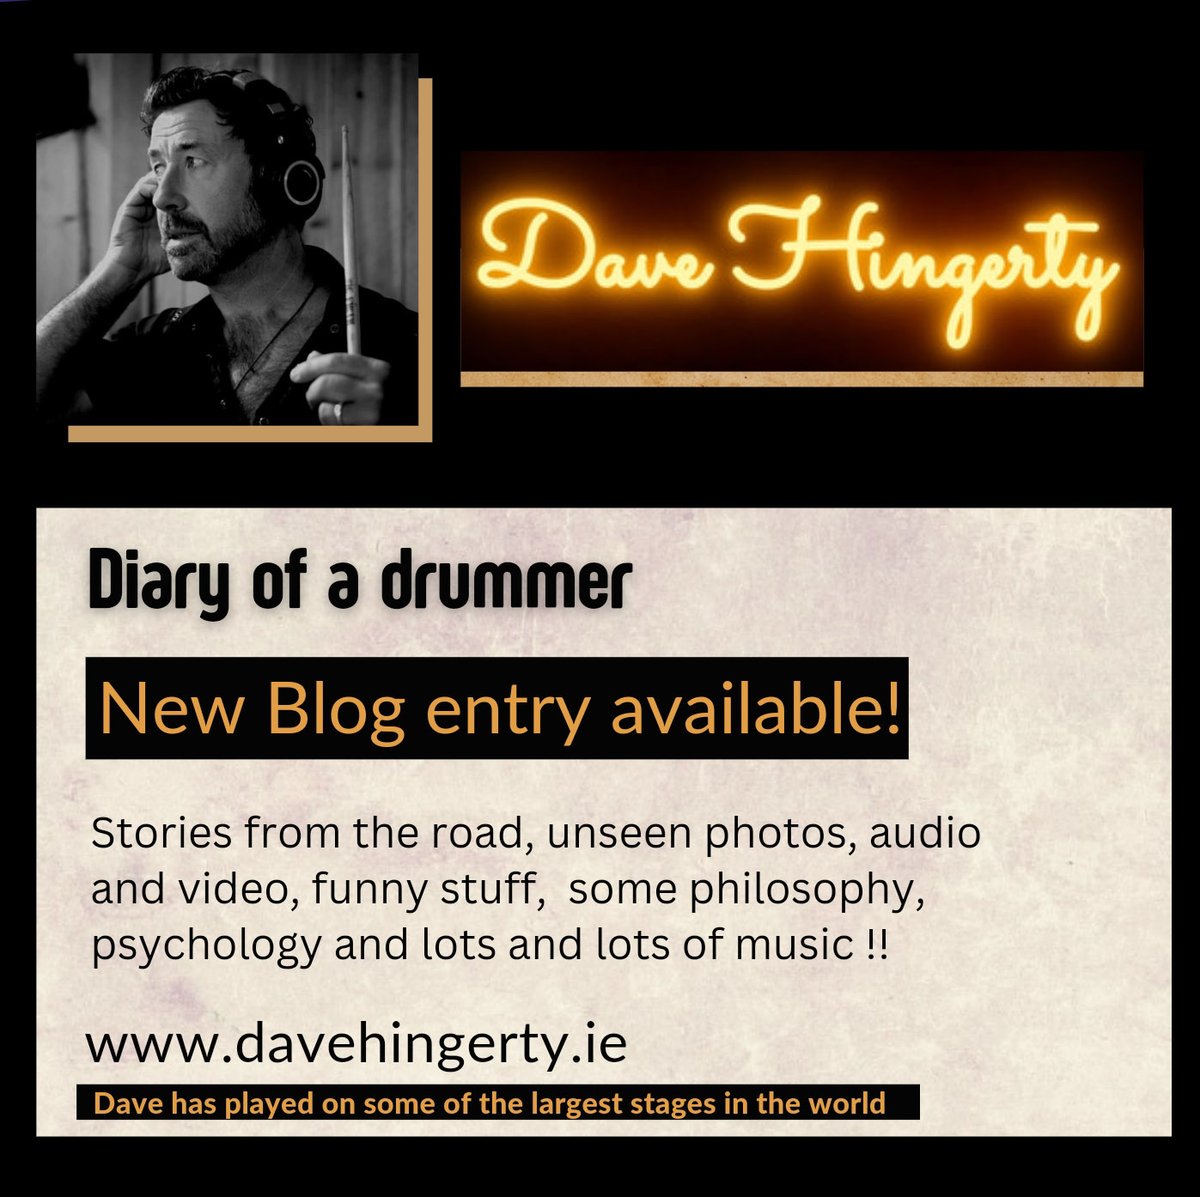 Check out Dave Hingerty's Blog (The Frames, Kila).

Stories from the road, unseen photos etc.

davehingerty.ie

#musician #drummer #drummerlife #musicblogs #drummerblog #drums #Blogs #drum #kila #theframes #side4collective #drummerforhire